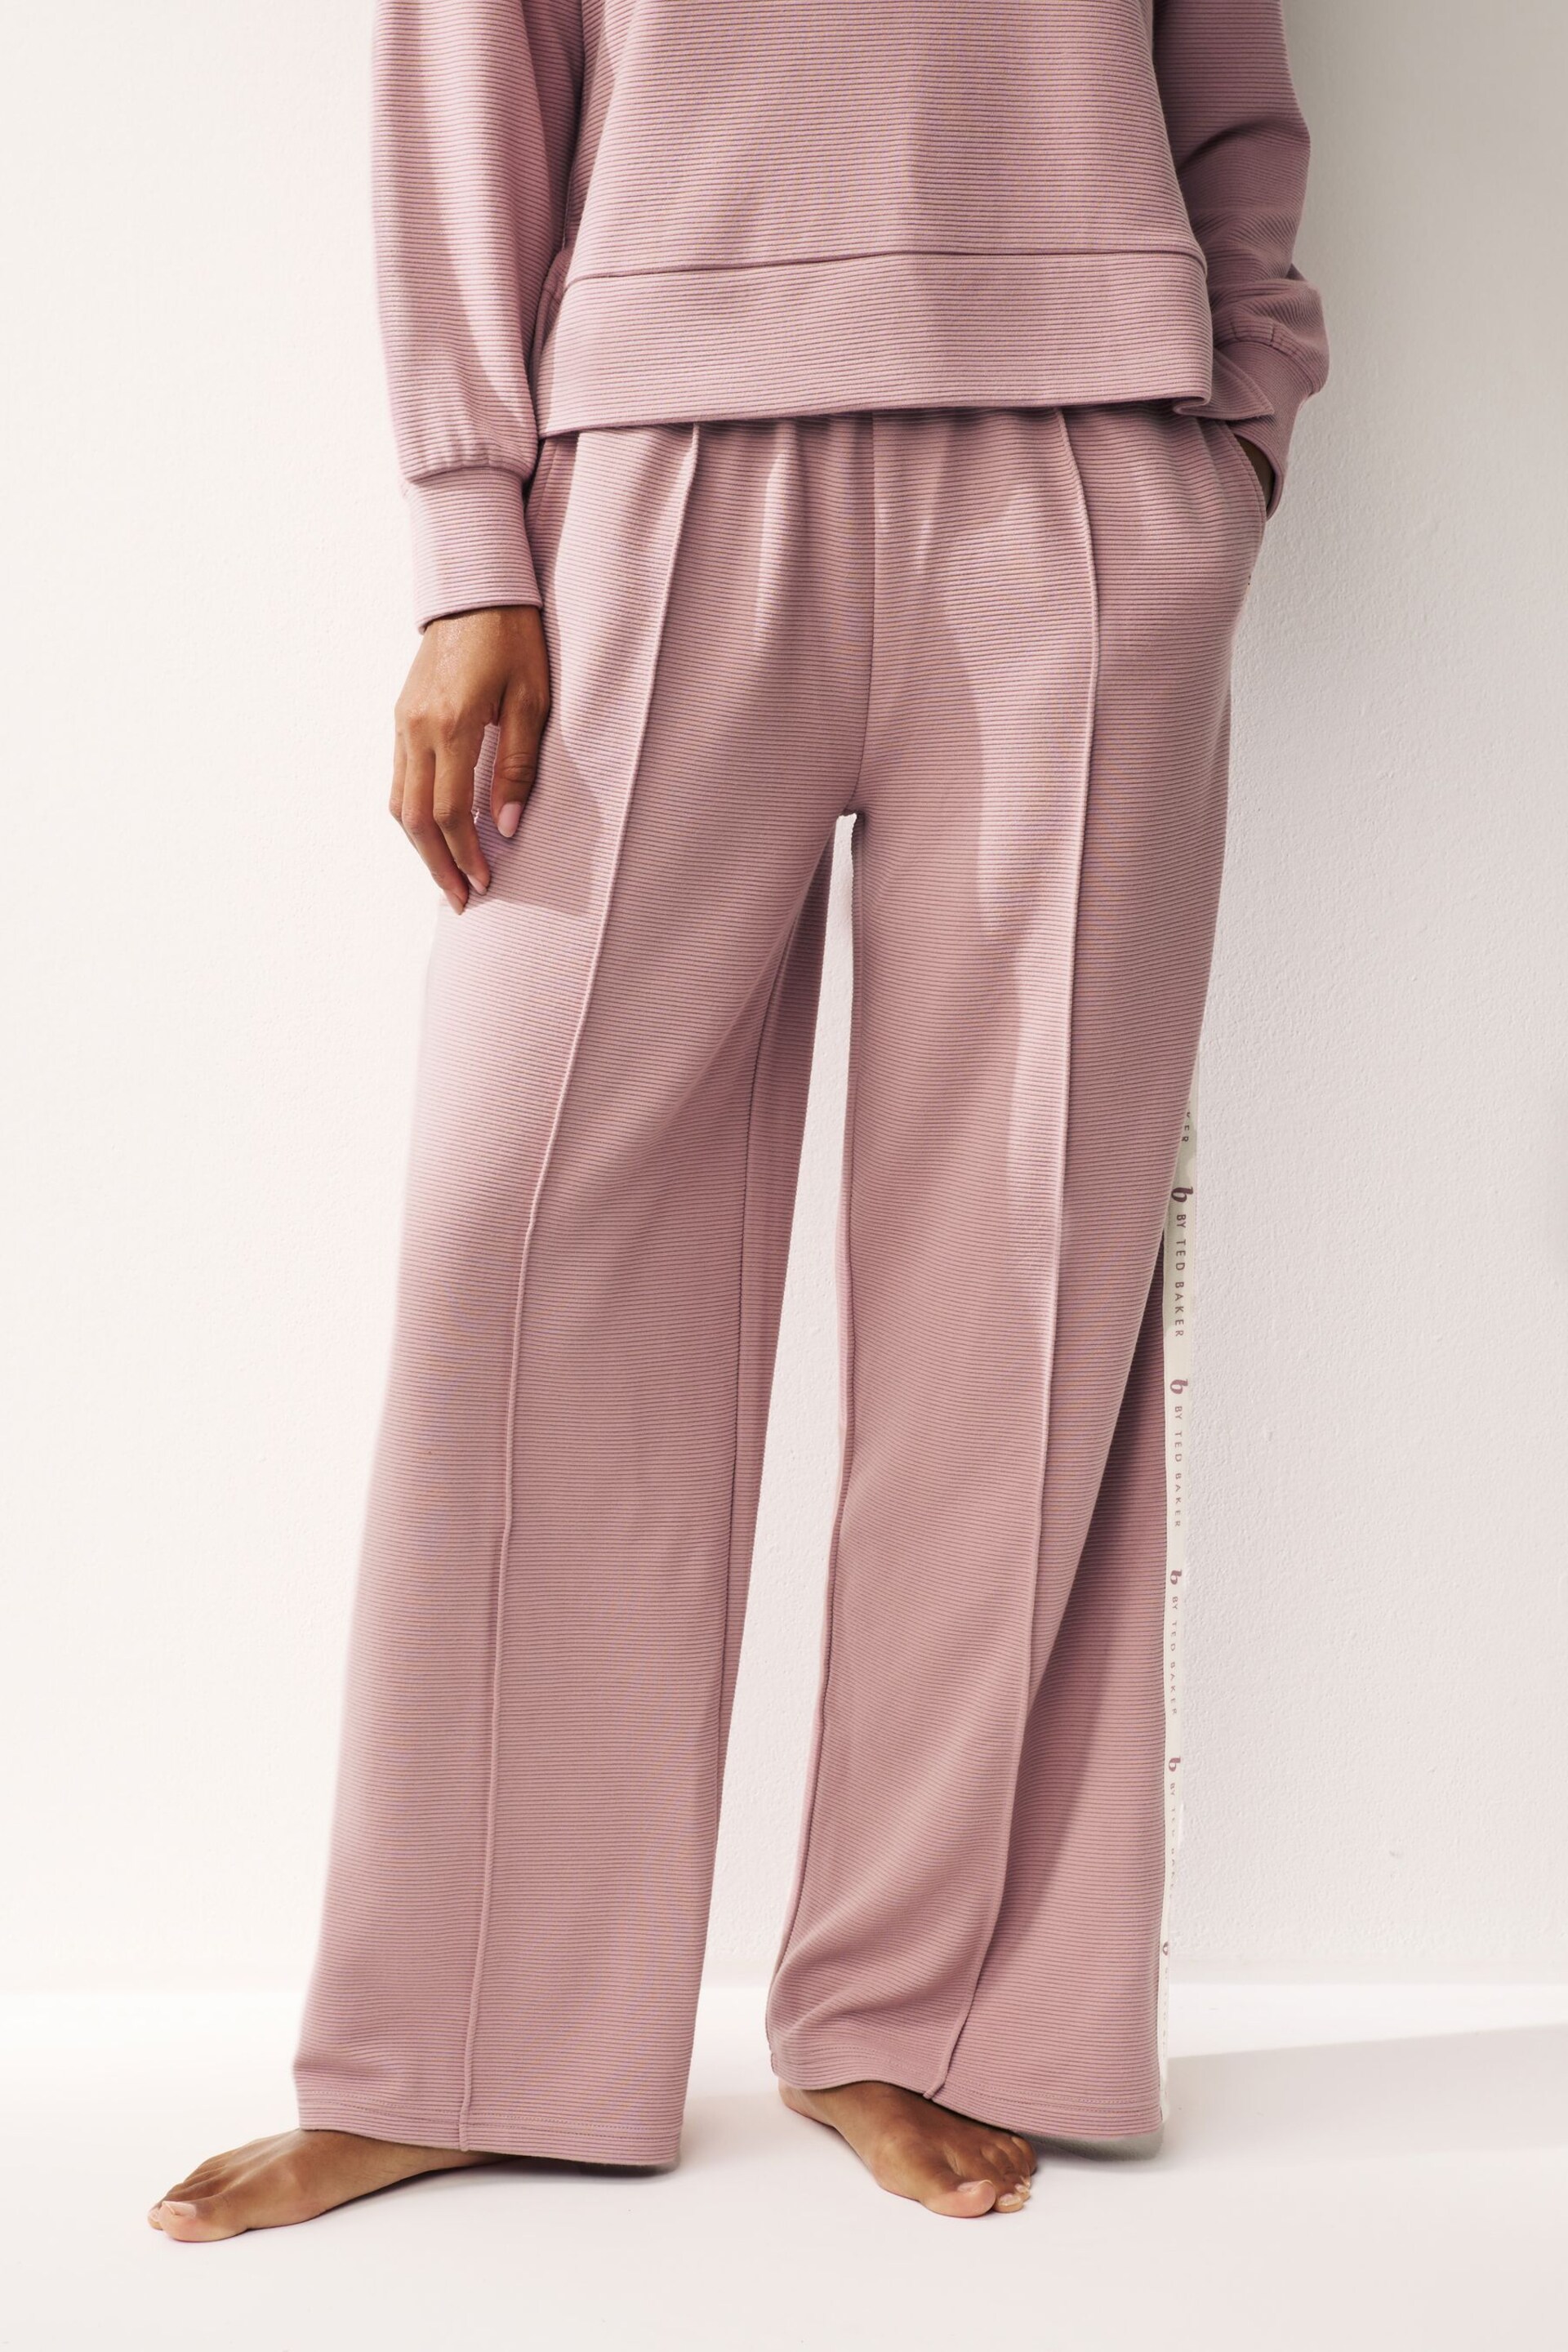 B by Ted Baker Ribbed Wide Leg Joggers - Image 1 of 7